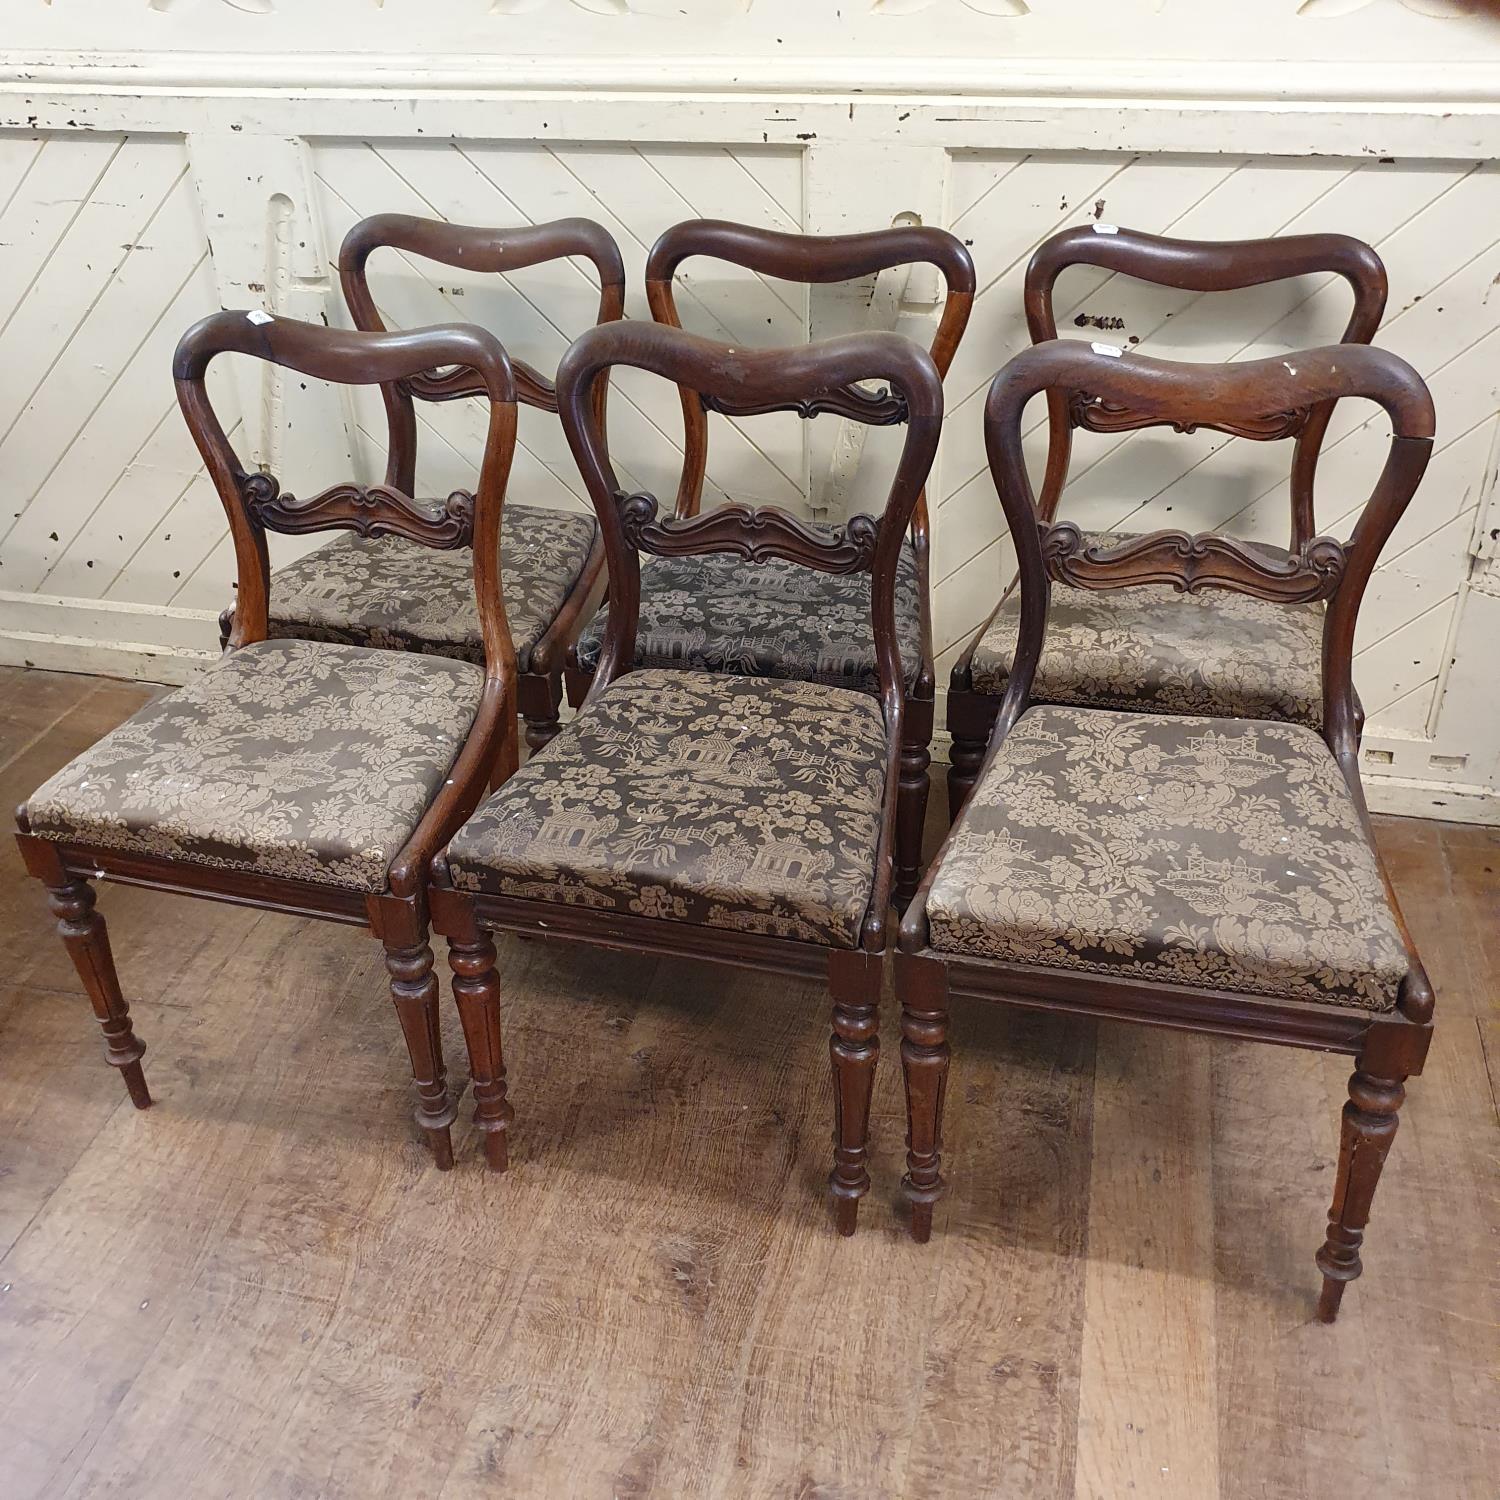 A set of six Victorian rosewood dining chairs, with drop in seats and turned front legs (6) Report